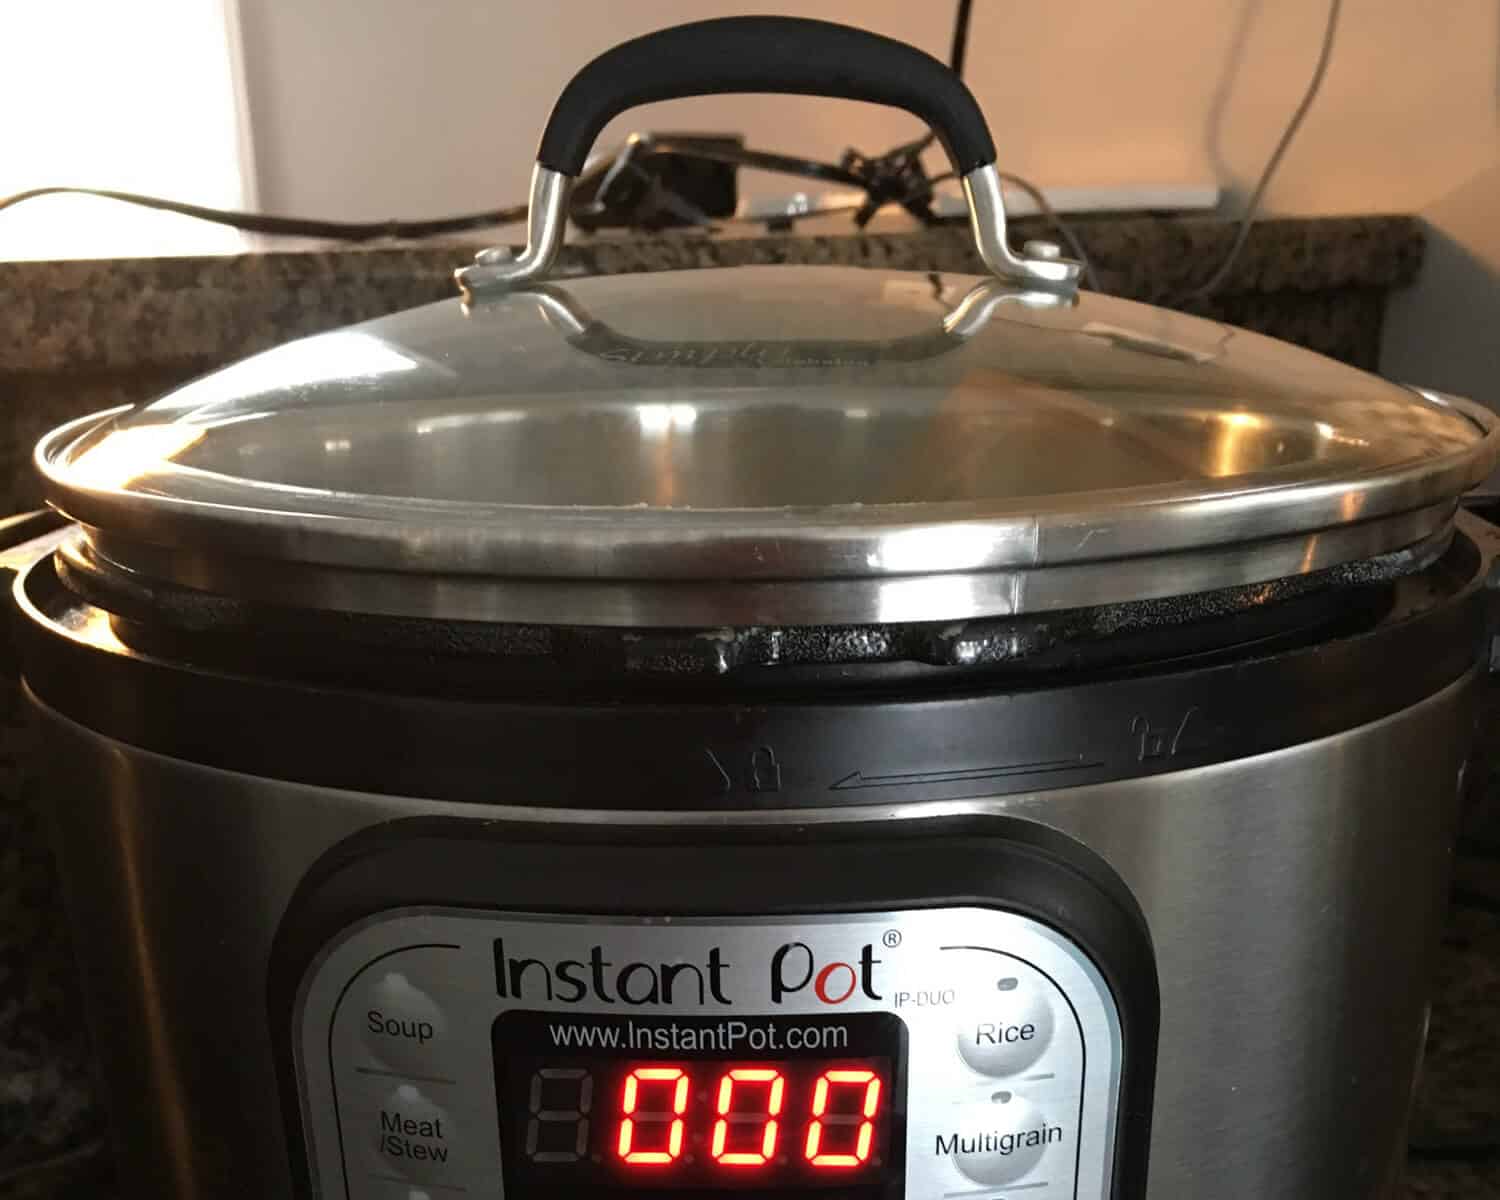 Instant pot with glass lid on and timer set to 0:00.